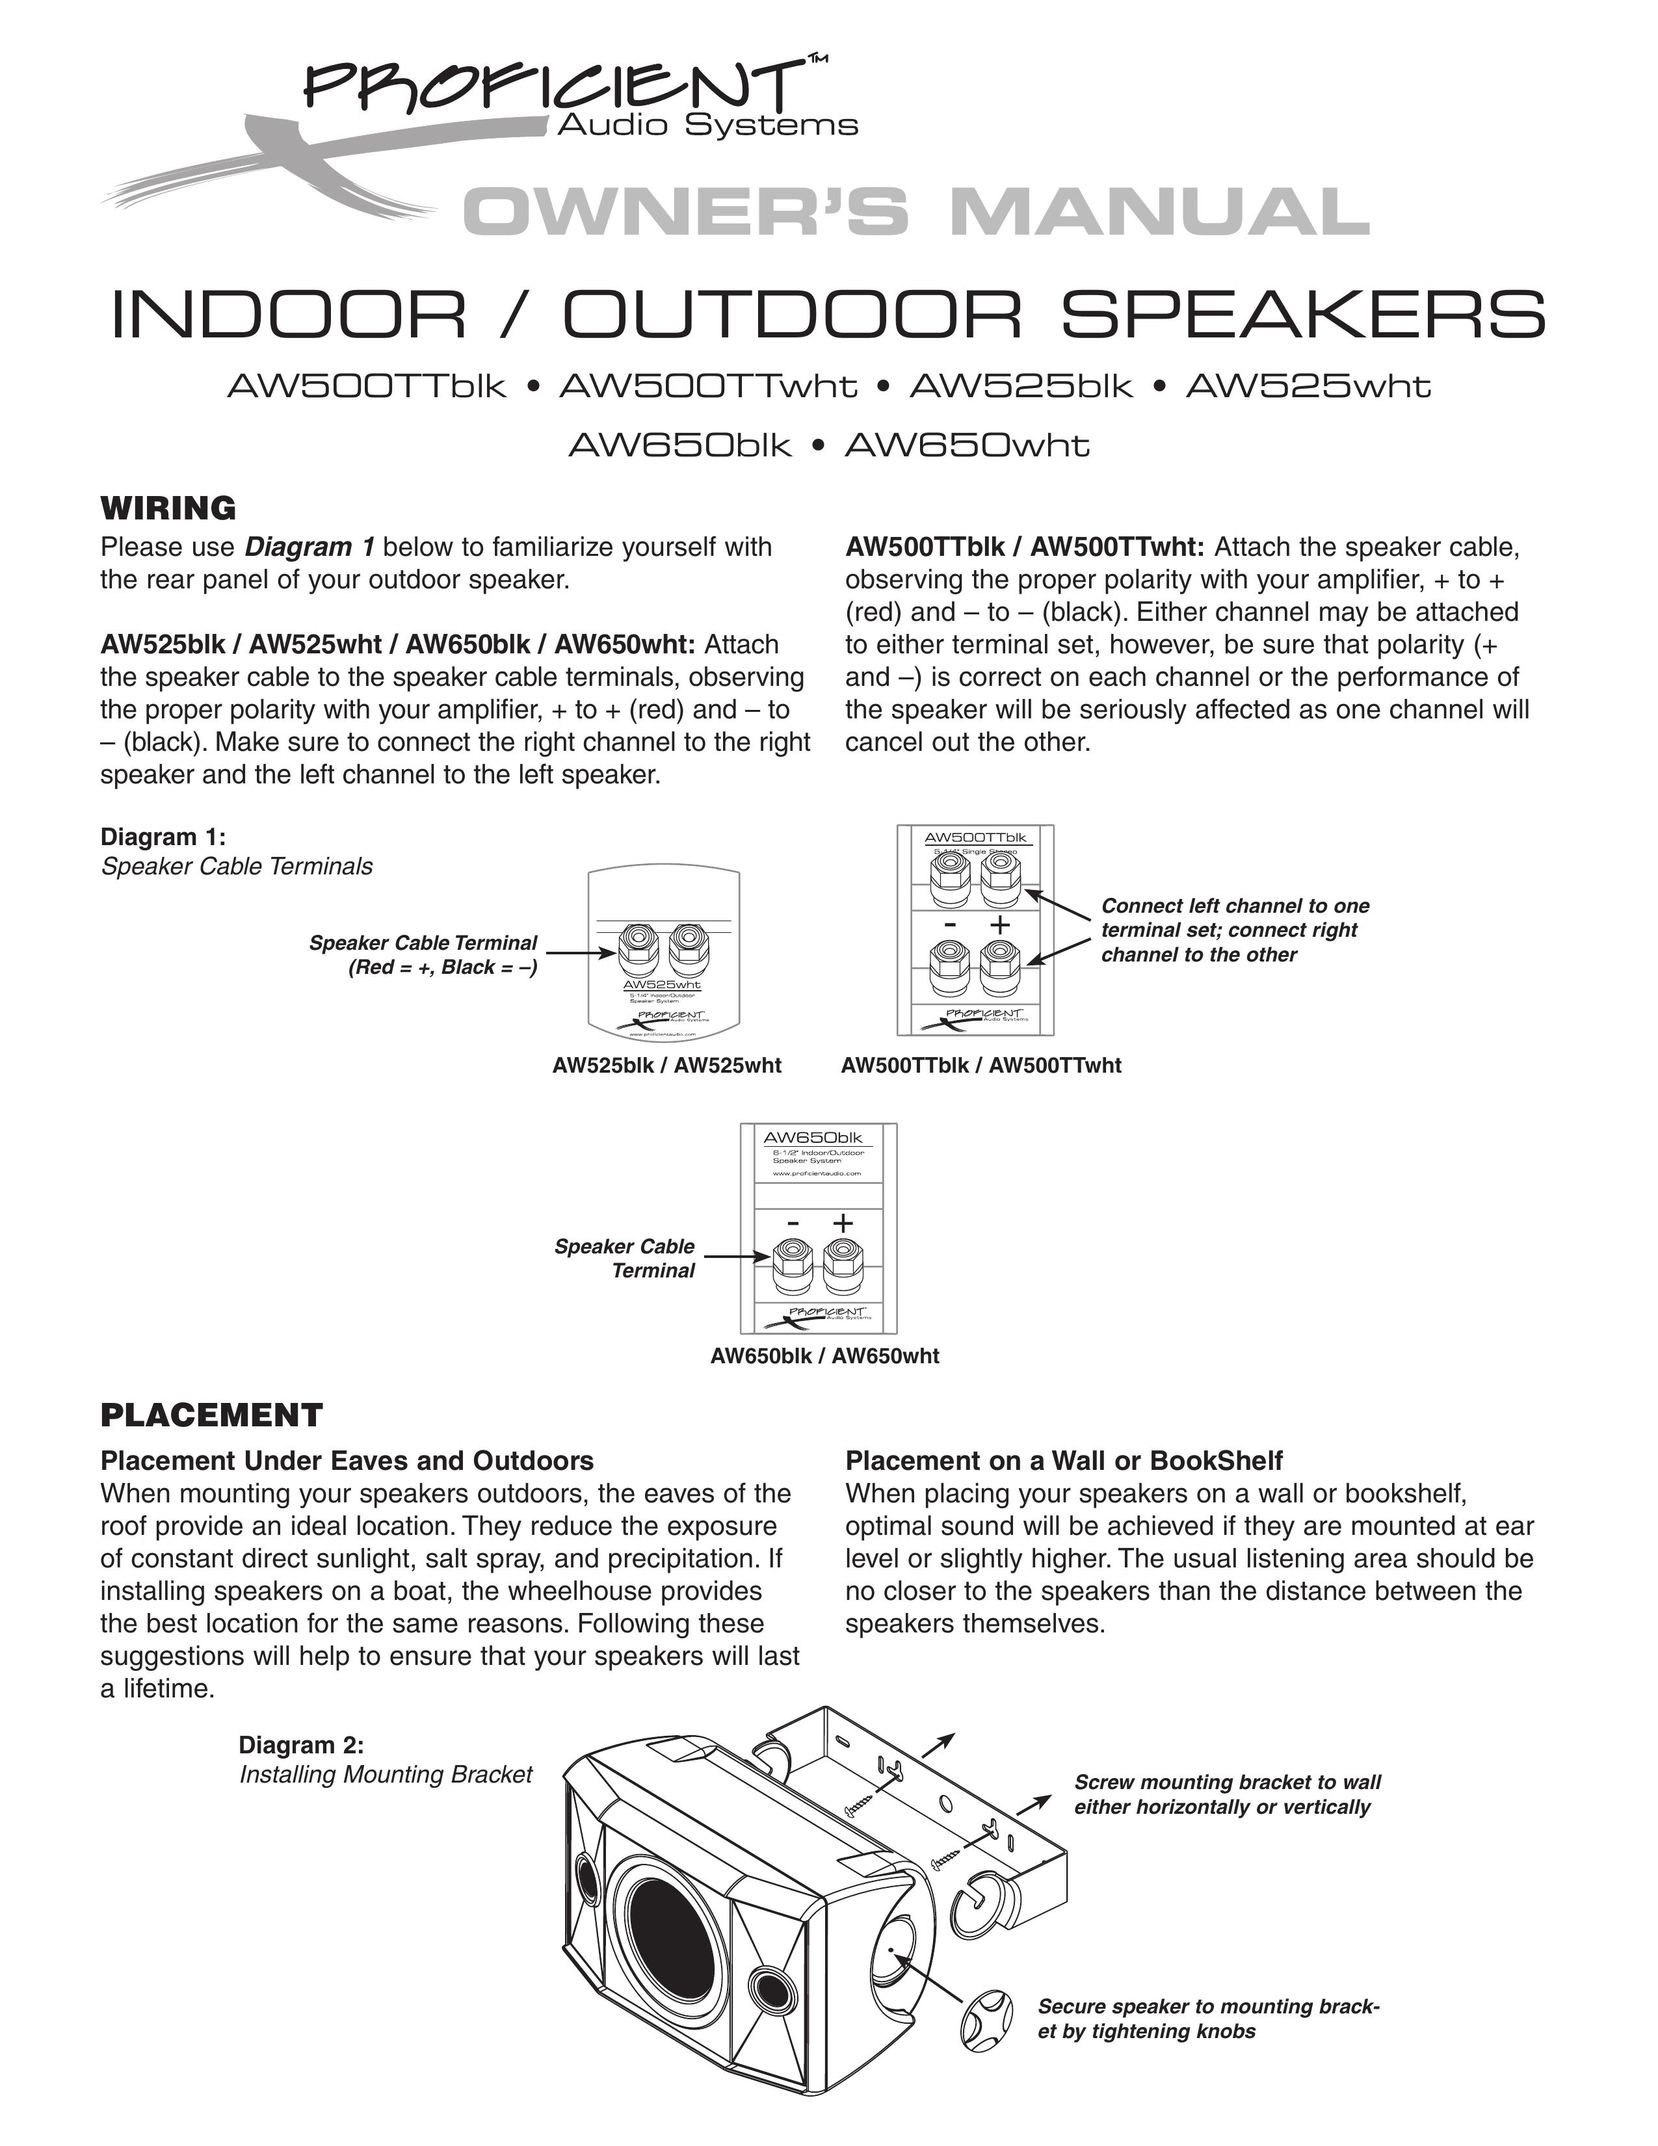 Proficient Audio Systems AW525WHT Speaker User Manual